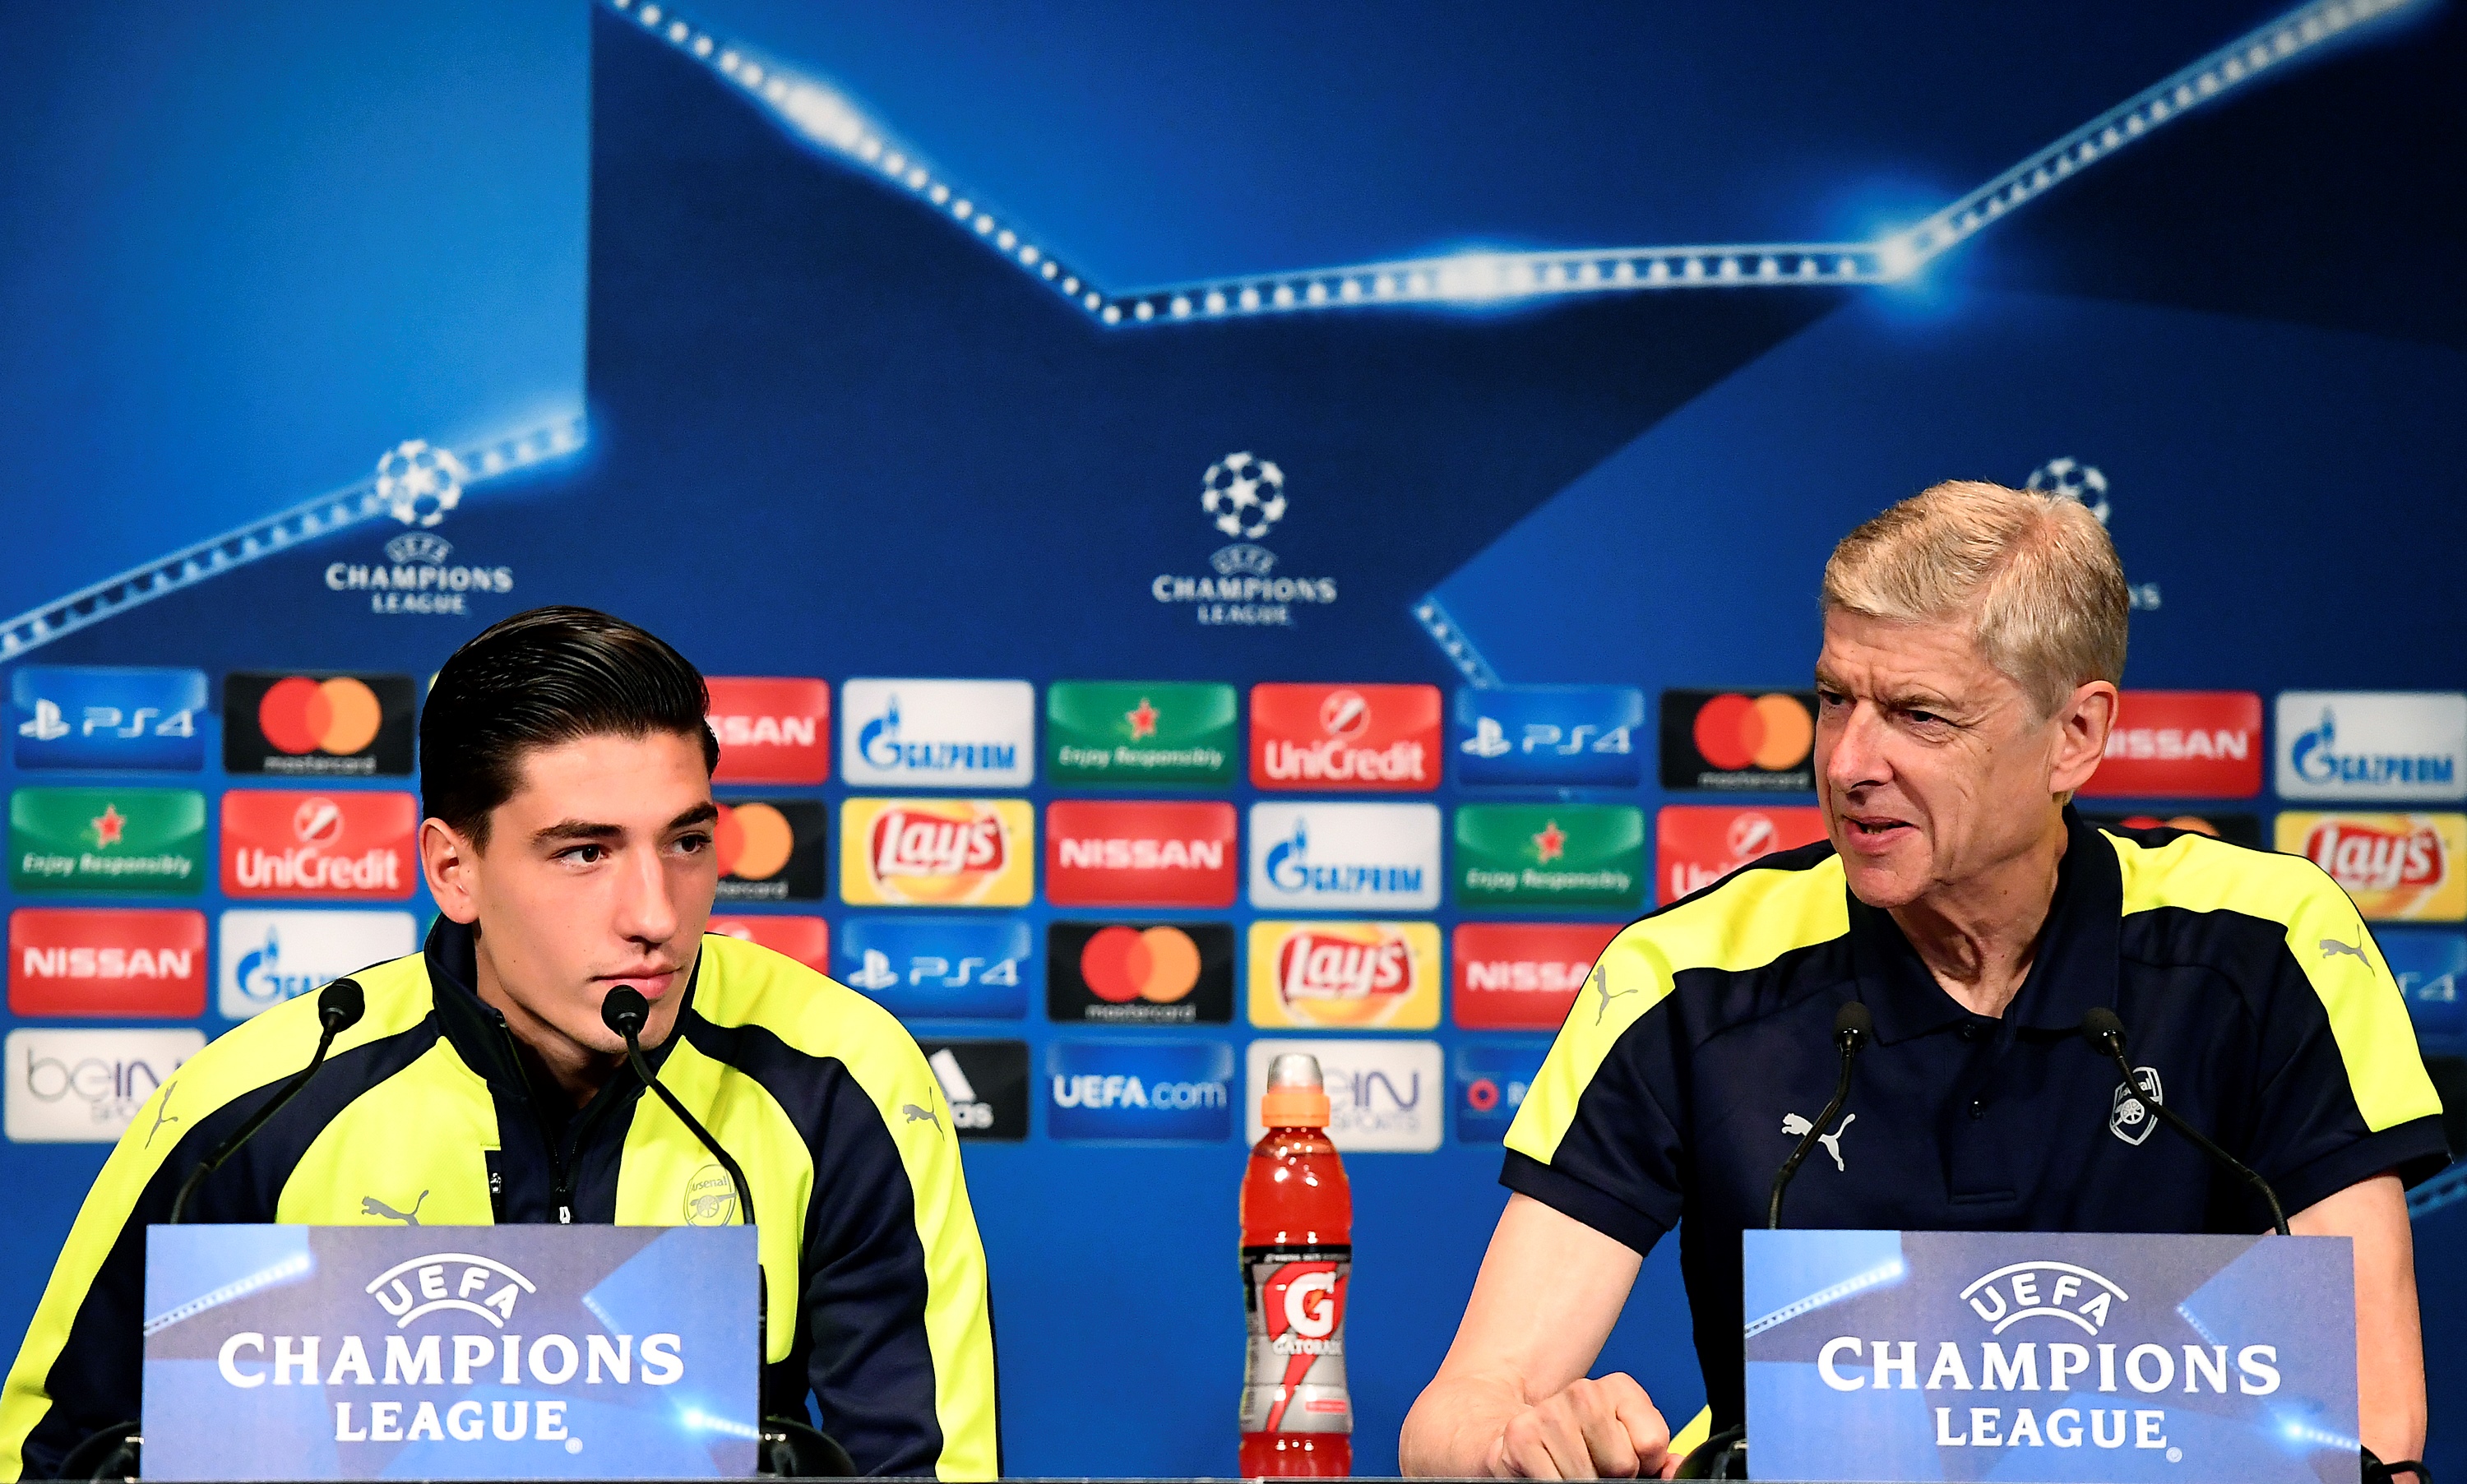 Arsene Wenger has played a major role in Bellerin's development and the Frenchman would hope the 21-year-old repays the faith by opting to stay at Arsenal over a move to Barcelona and Man City. (Picture Courtesy - AFP/Getty Images)